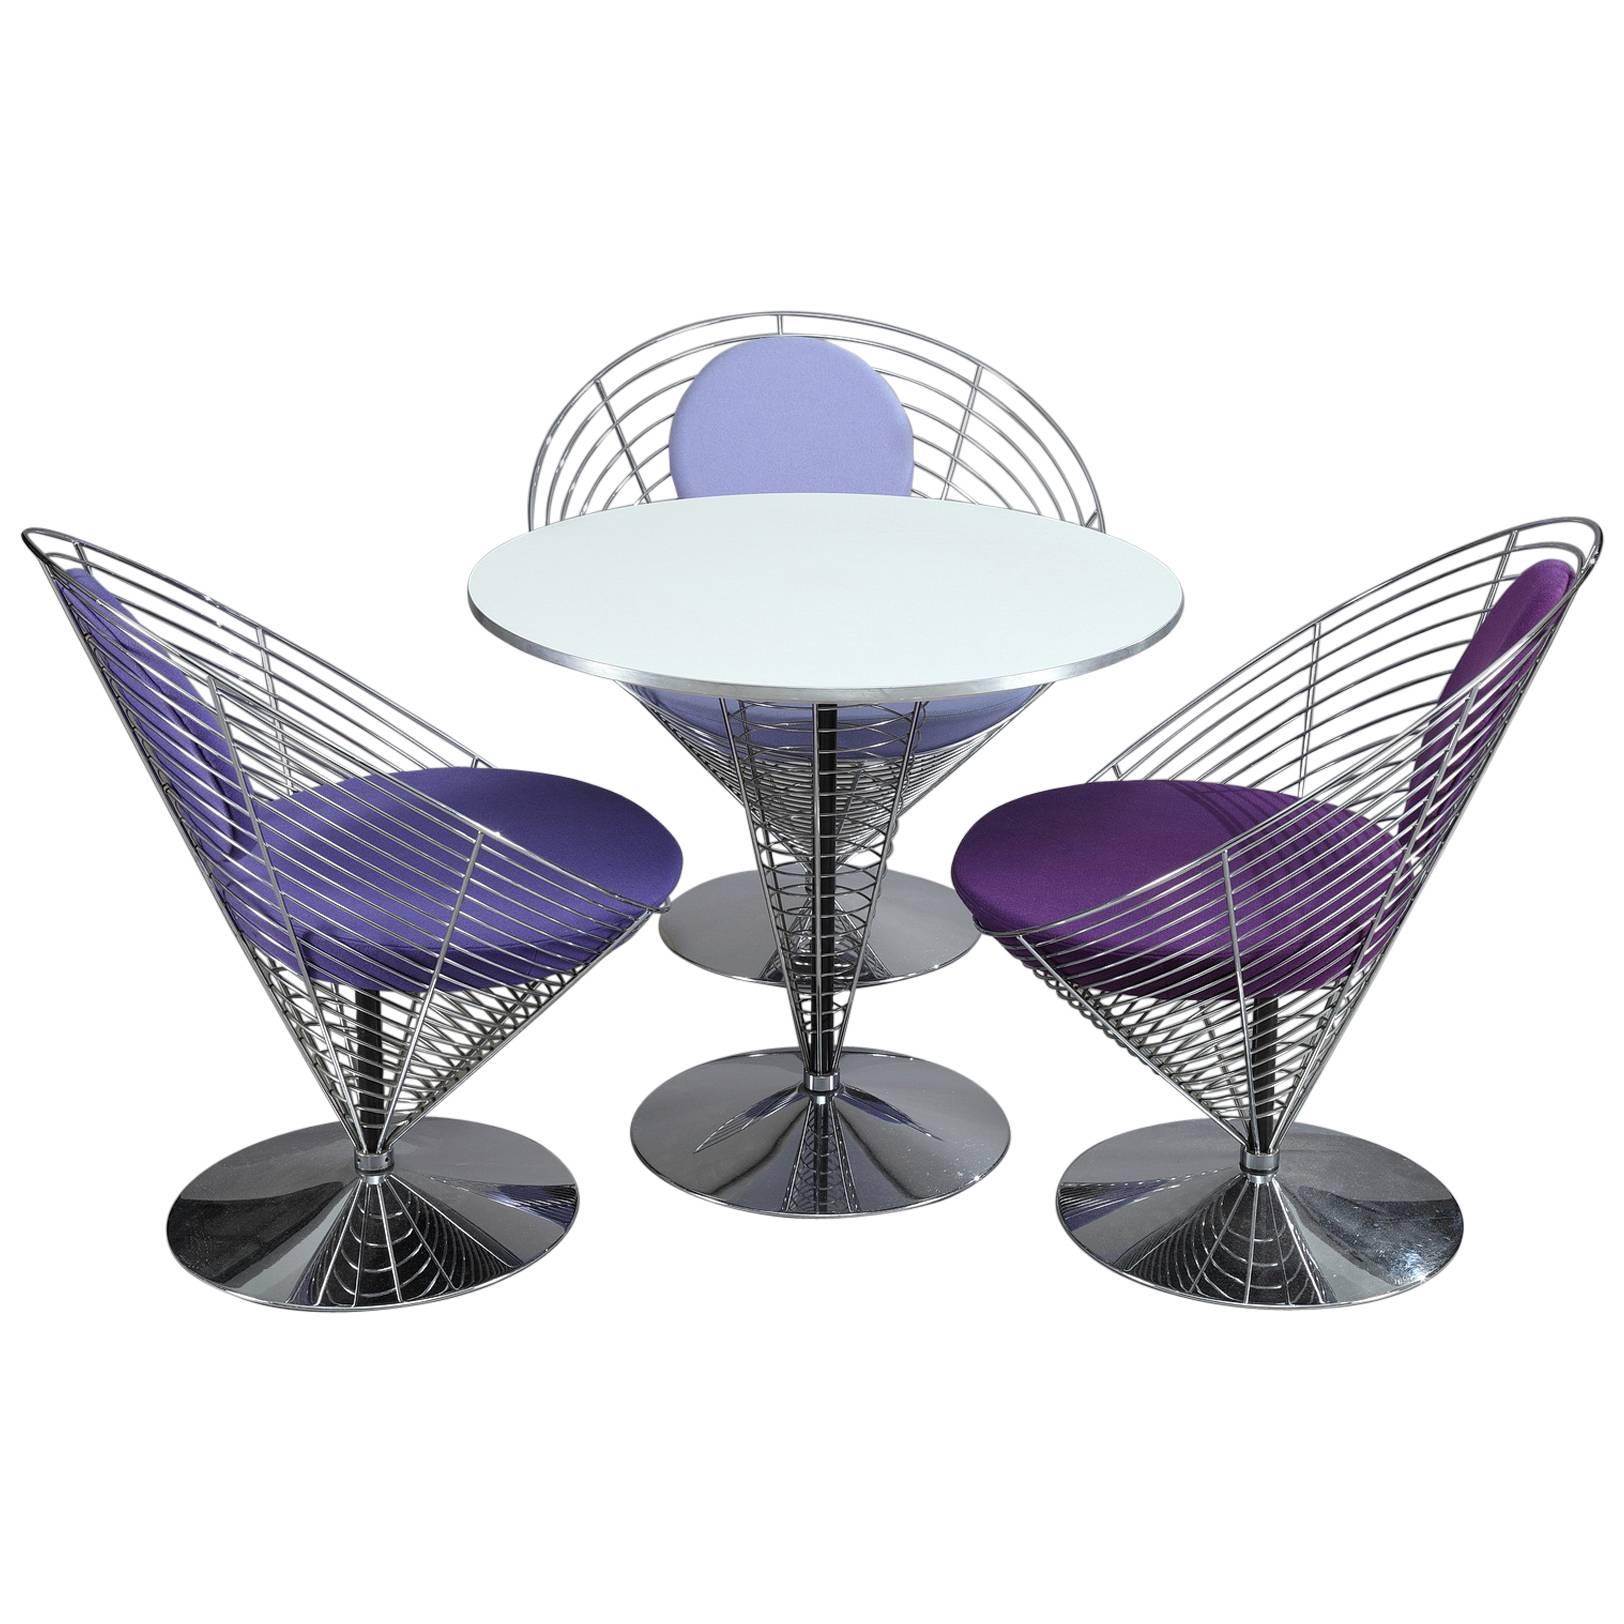 Three Wire Cone Chairs and Table Designed by Verner Panton, Late 1980s